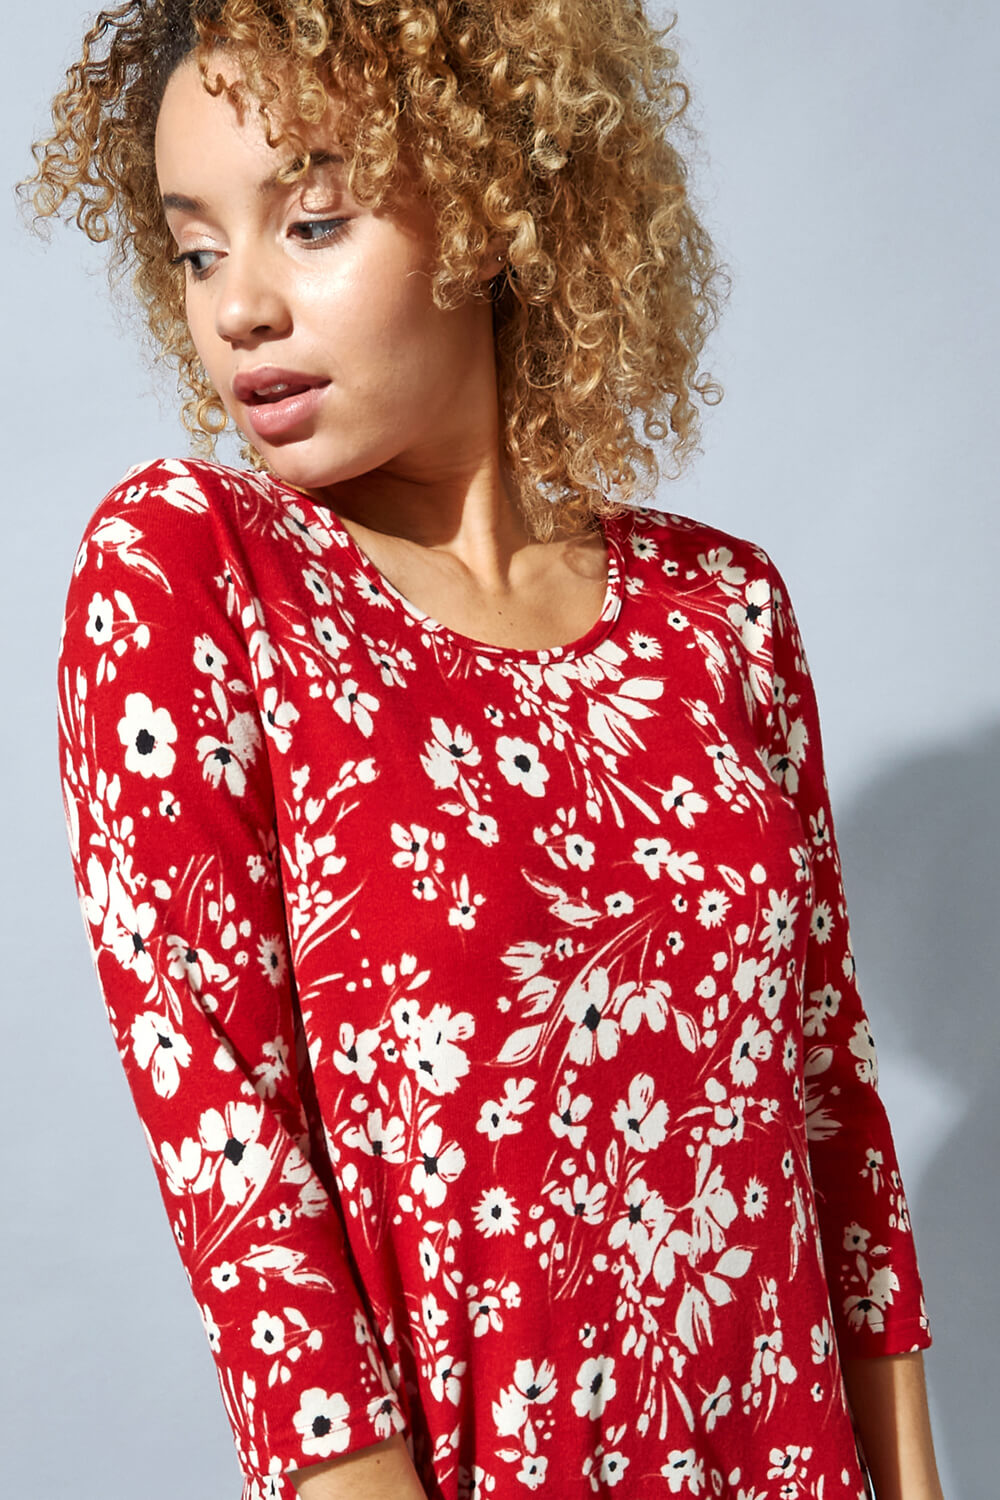 Red Floral Print Swing Dress, Image 4 of 4